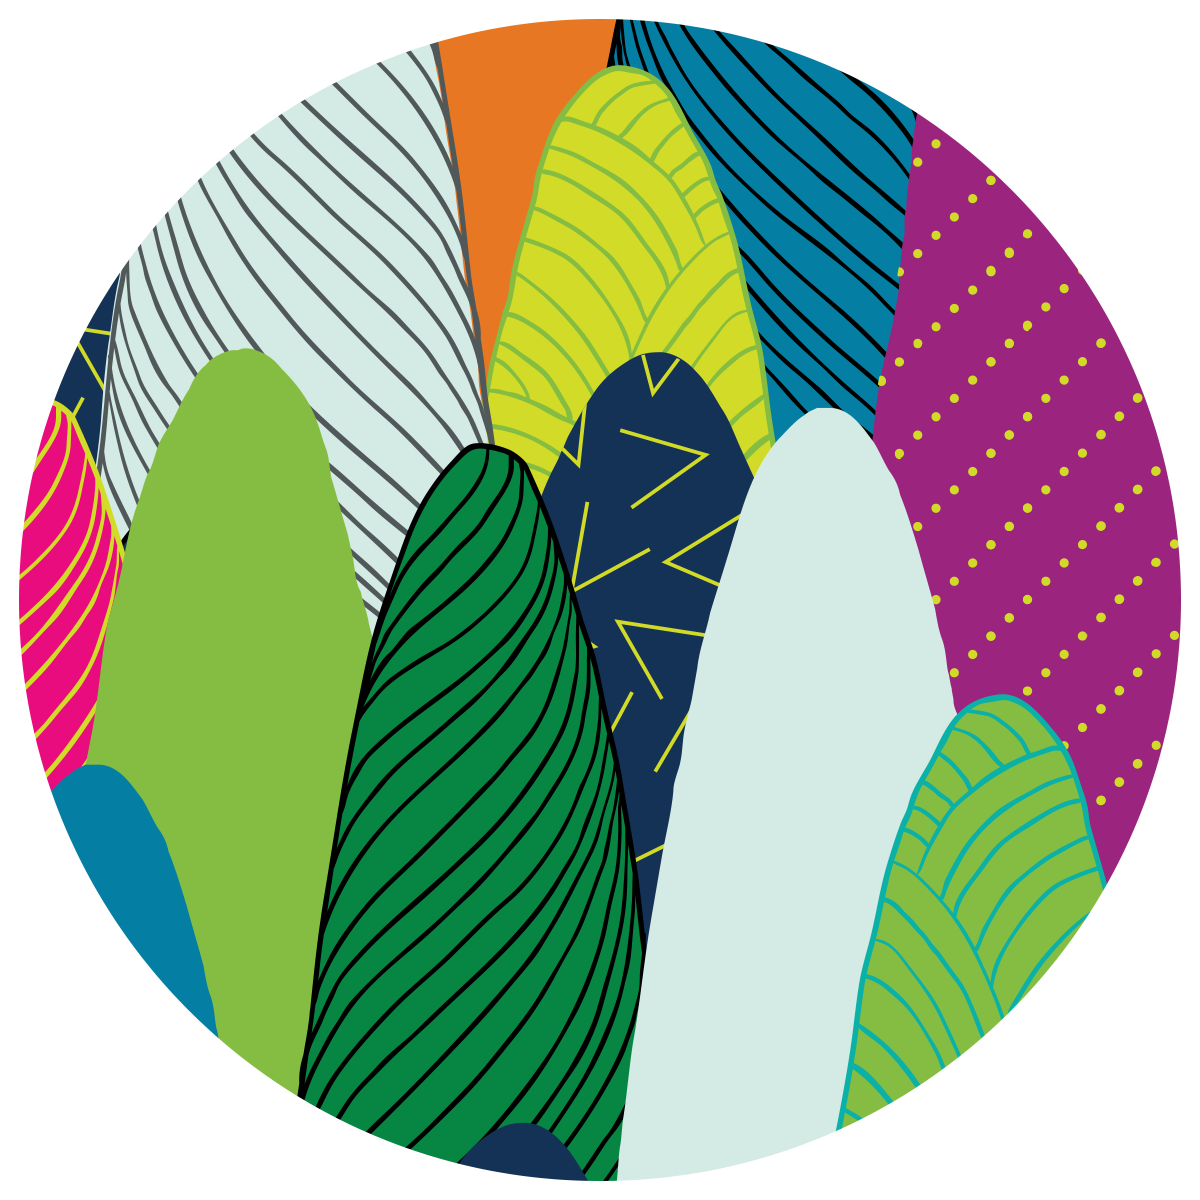 illustration of colorful trees inside of a circle